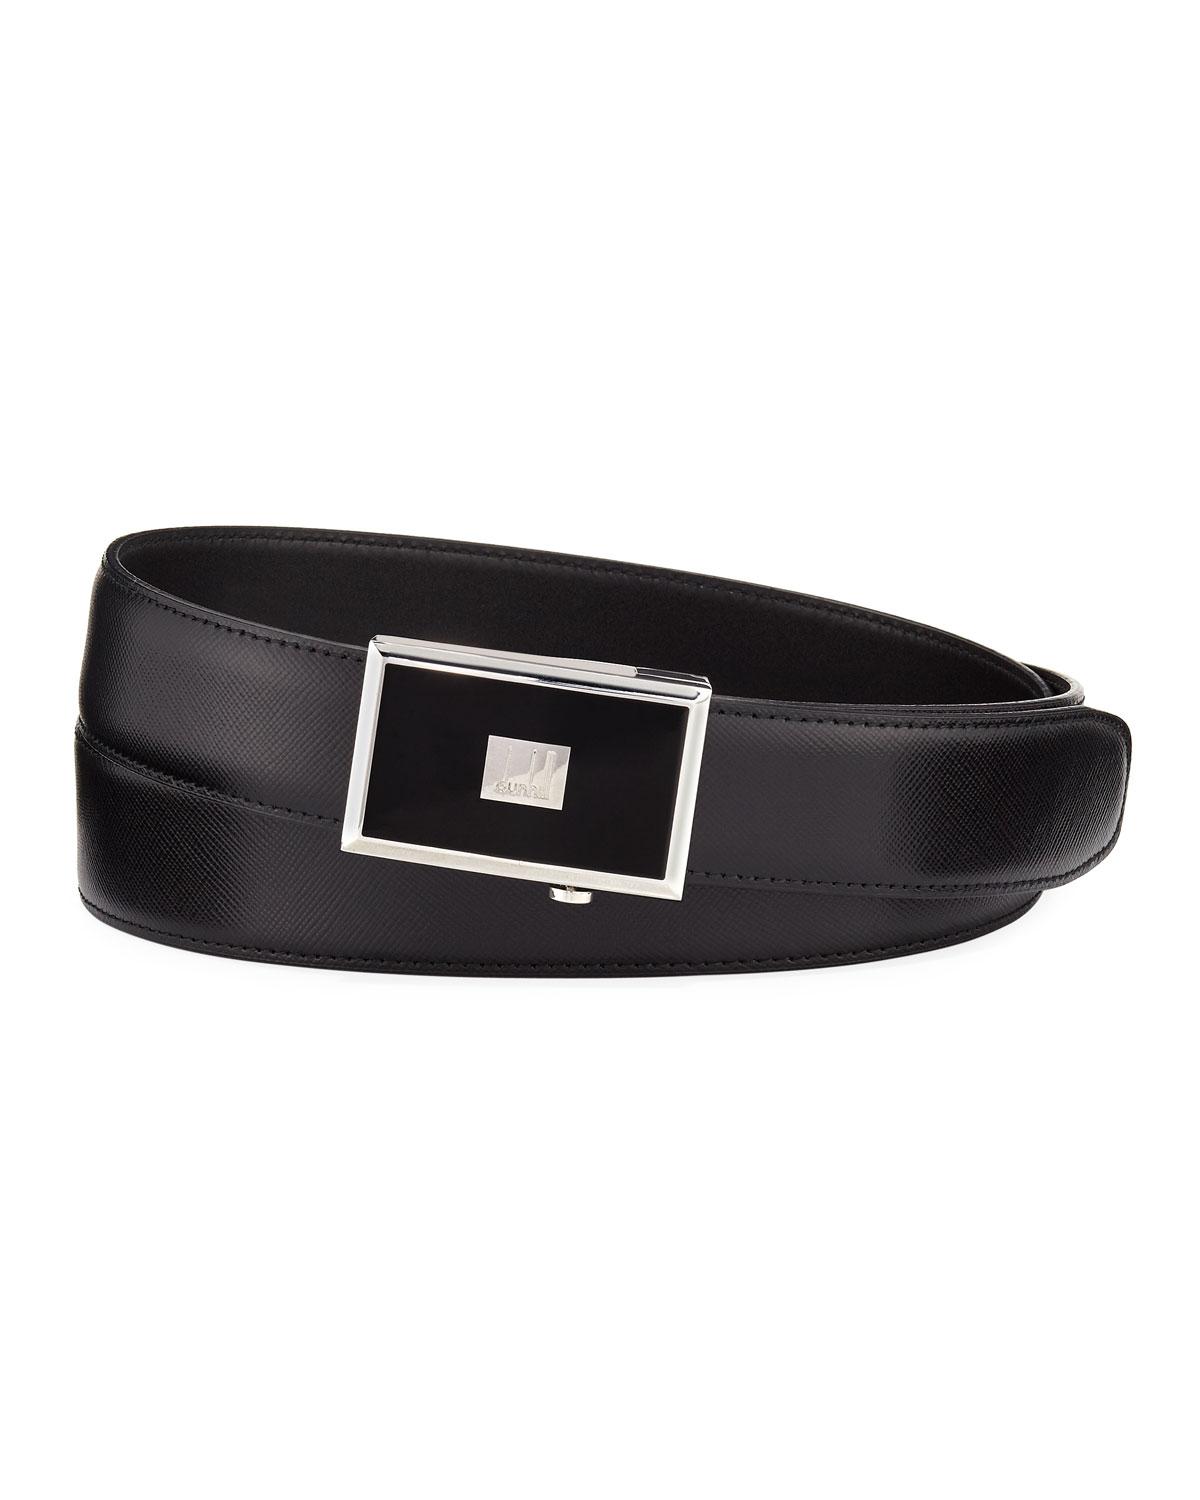 Dunhill 30mm Saffiano Leather Belt in Black for Men - Lyst